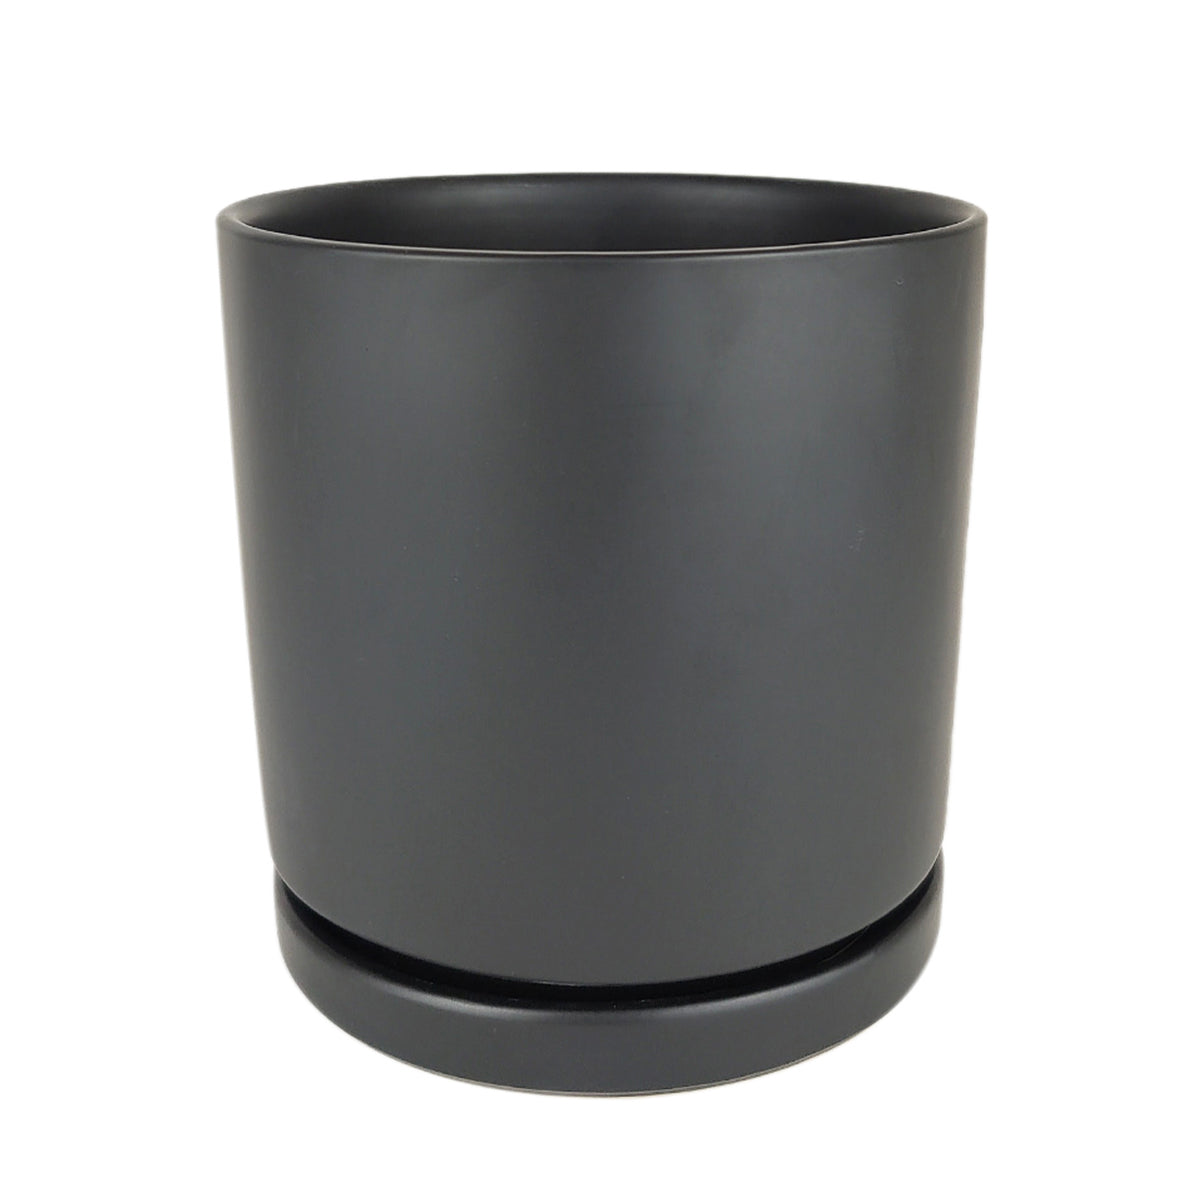 6 inch Black porcelain cylinder pot, pot with drainage hole and saucer for houseplants, the best pot for medium houseplants and succulents